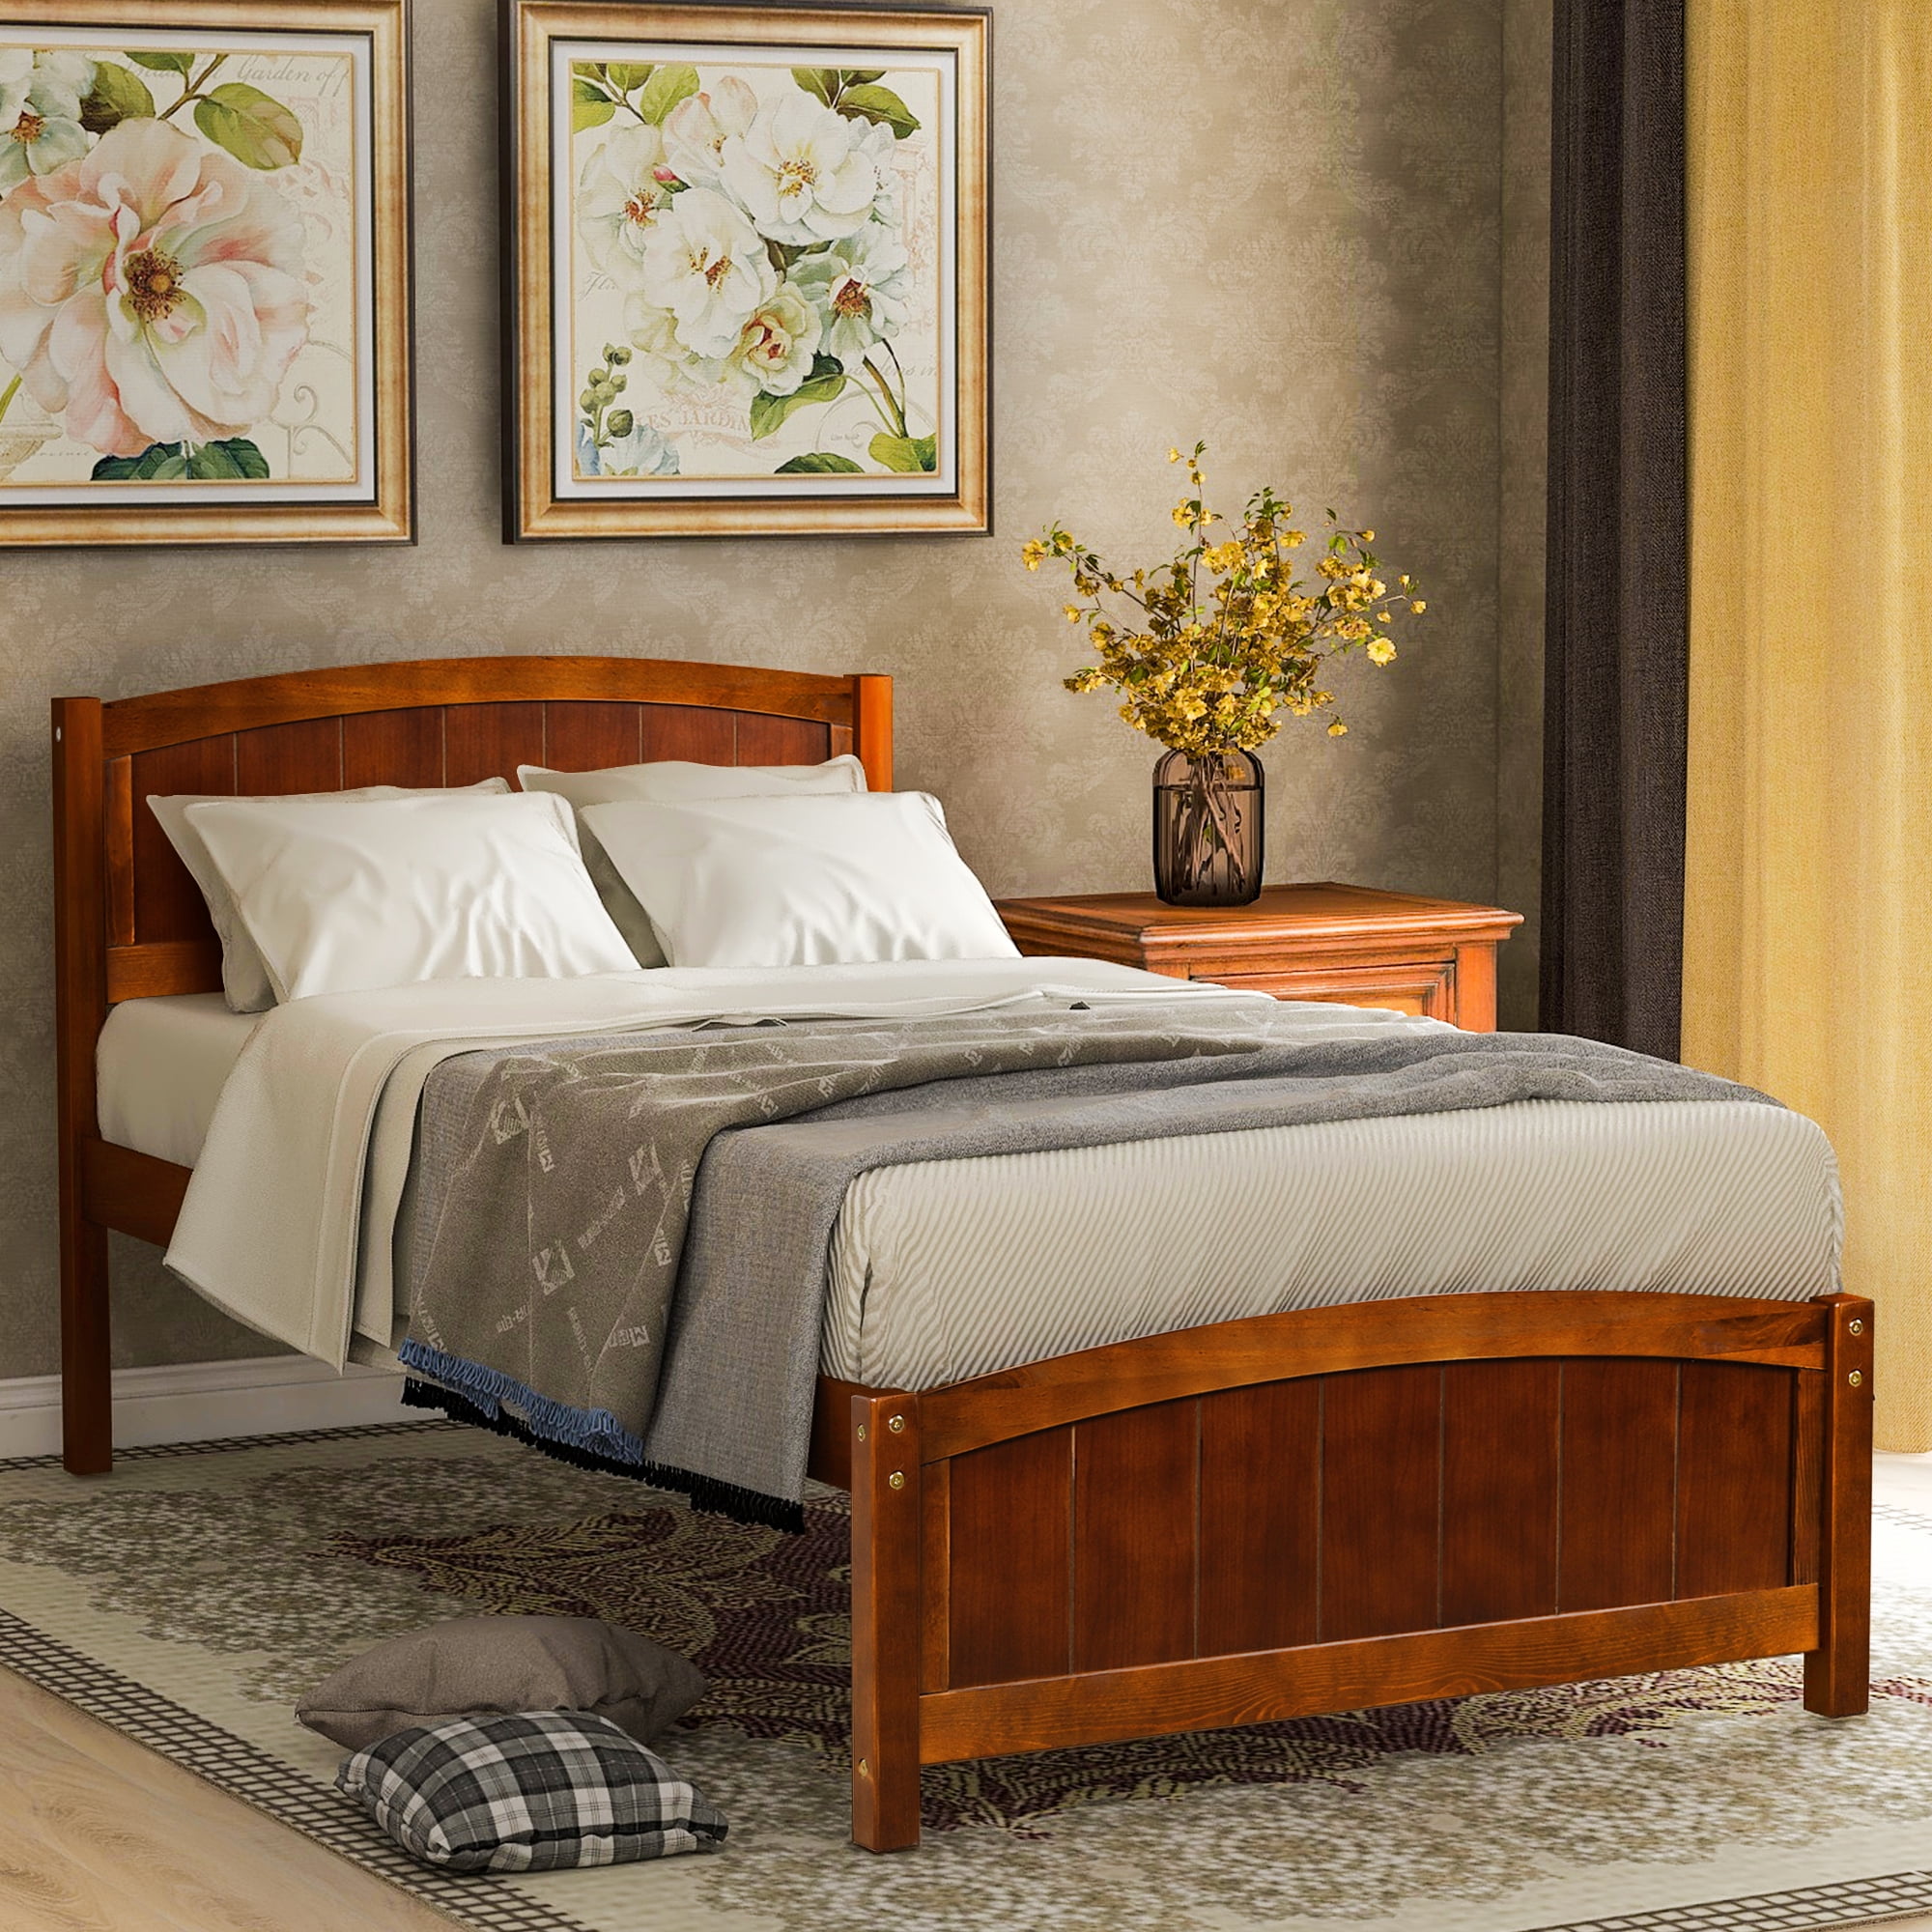 Twin Bed Frame for Kids, Walnut Twin Platform Bed Frame with Headboard